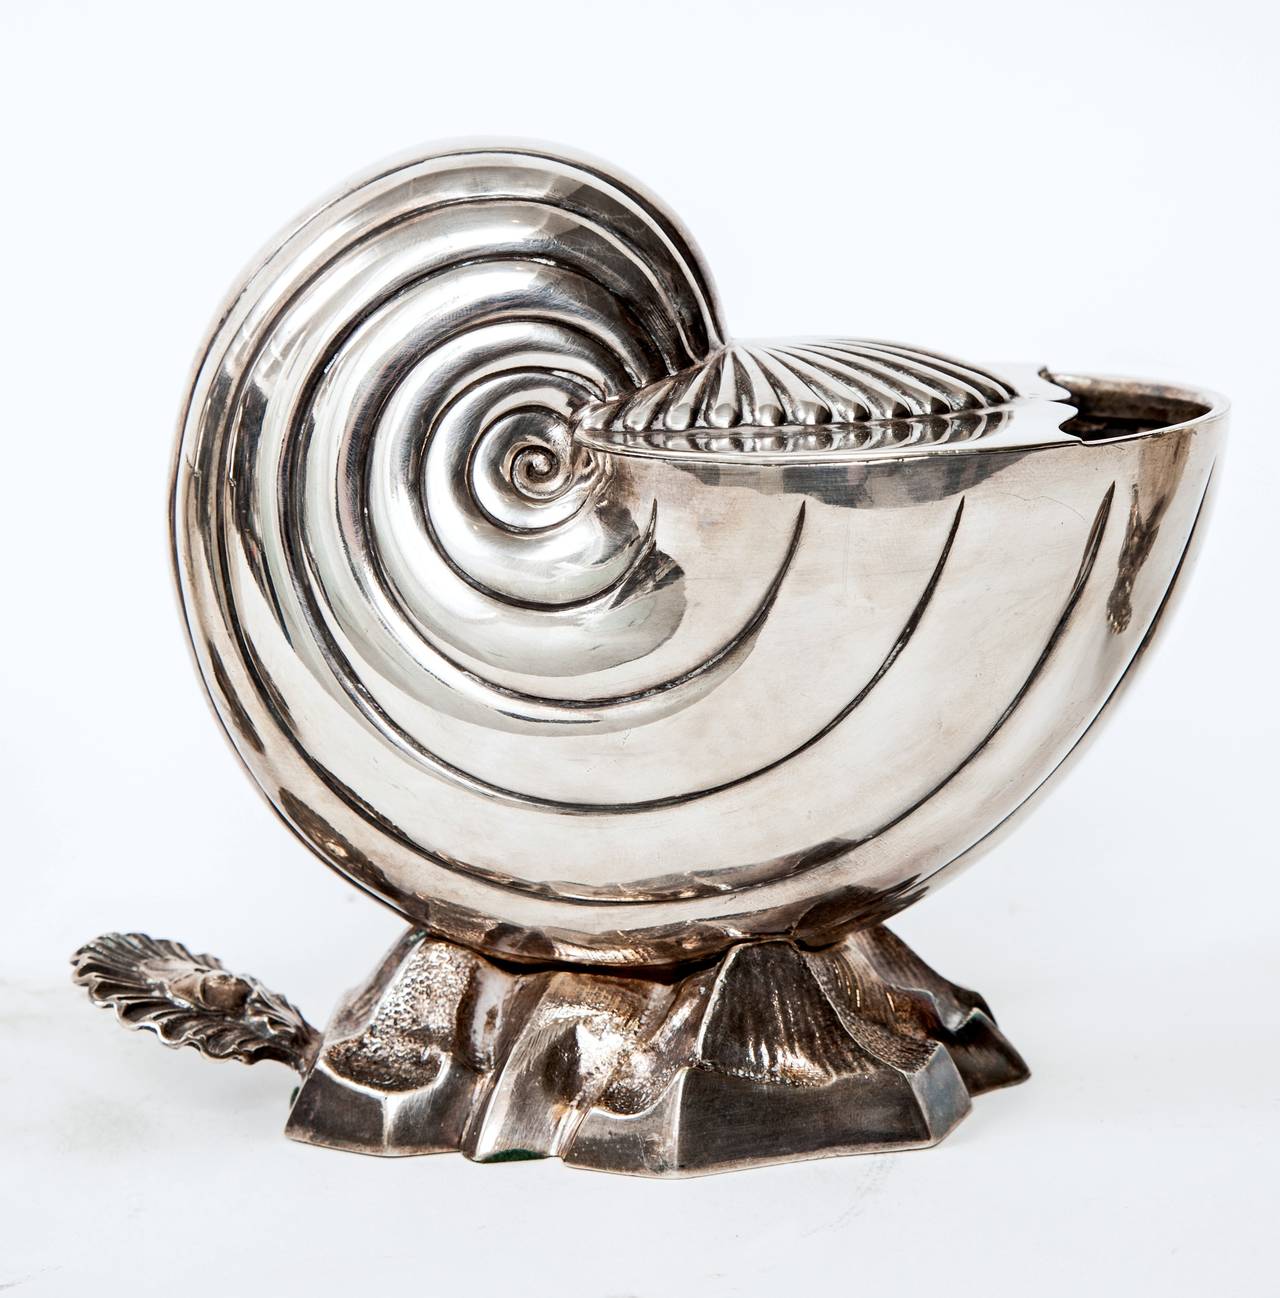 19th century Victorian silver plate spoon warmers in the shape of nautilus shells resting on a bed of sea rocks ending with an ornate shell design. Originally the lids opened up to dip the spoons into hot water with the exception of one that is a